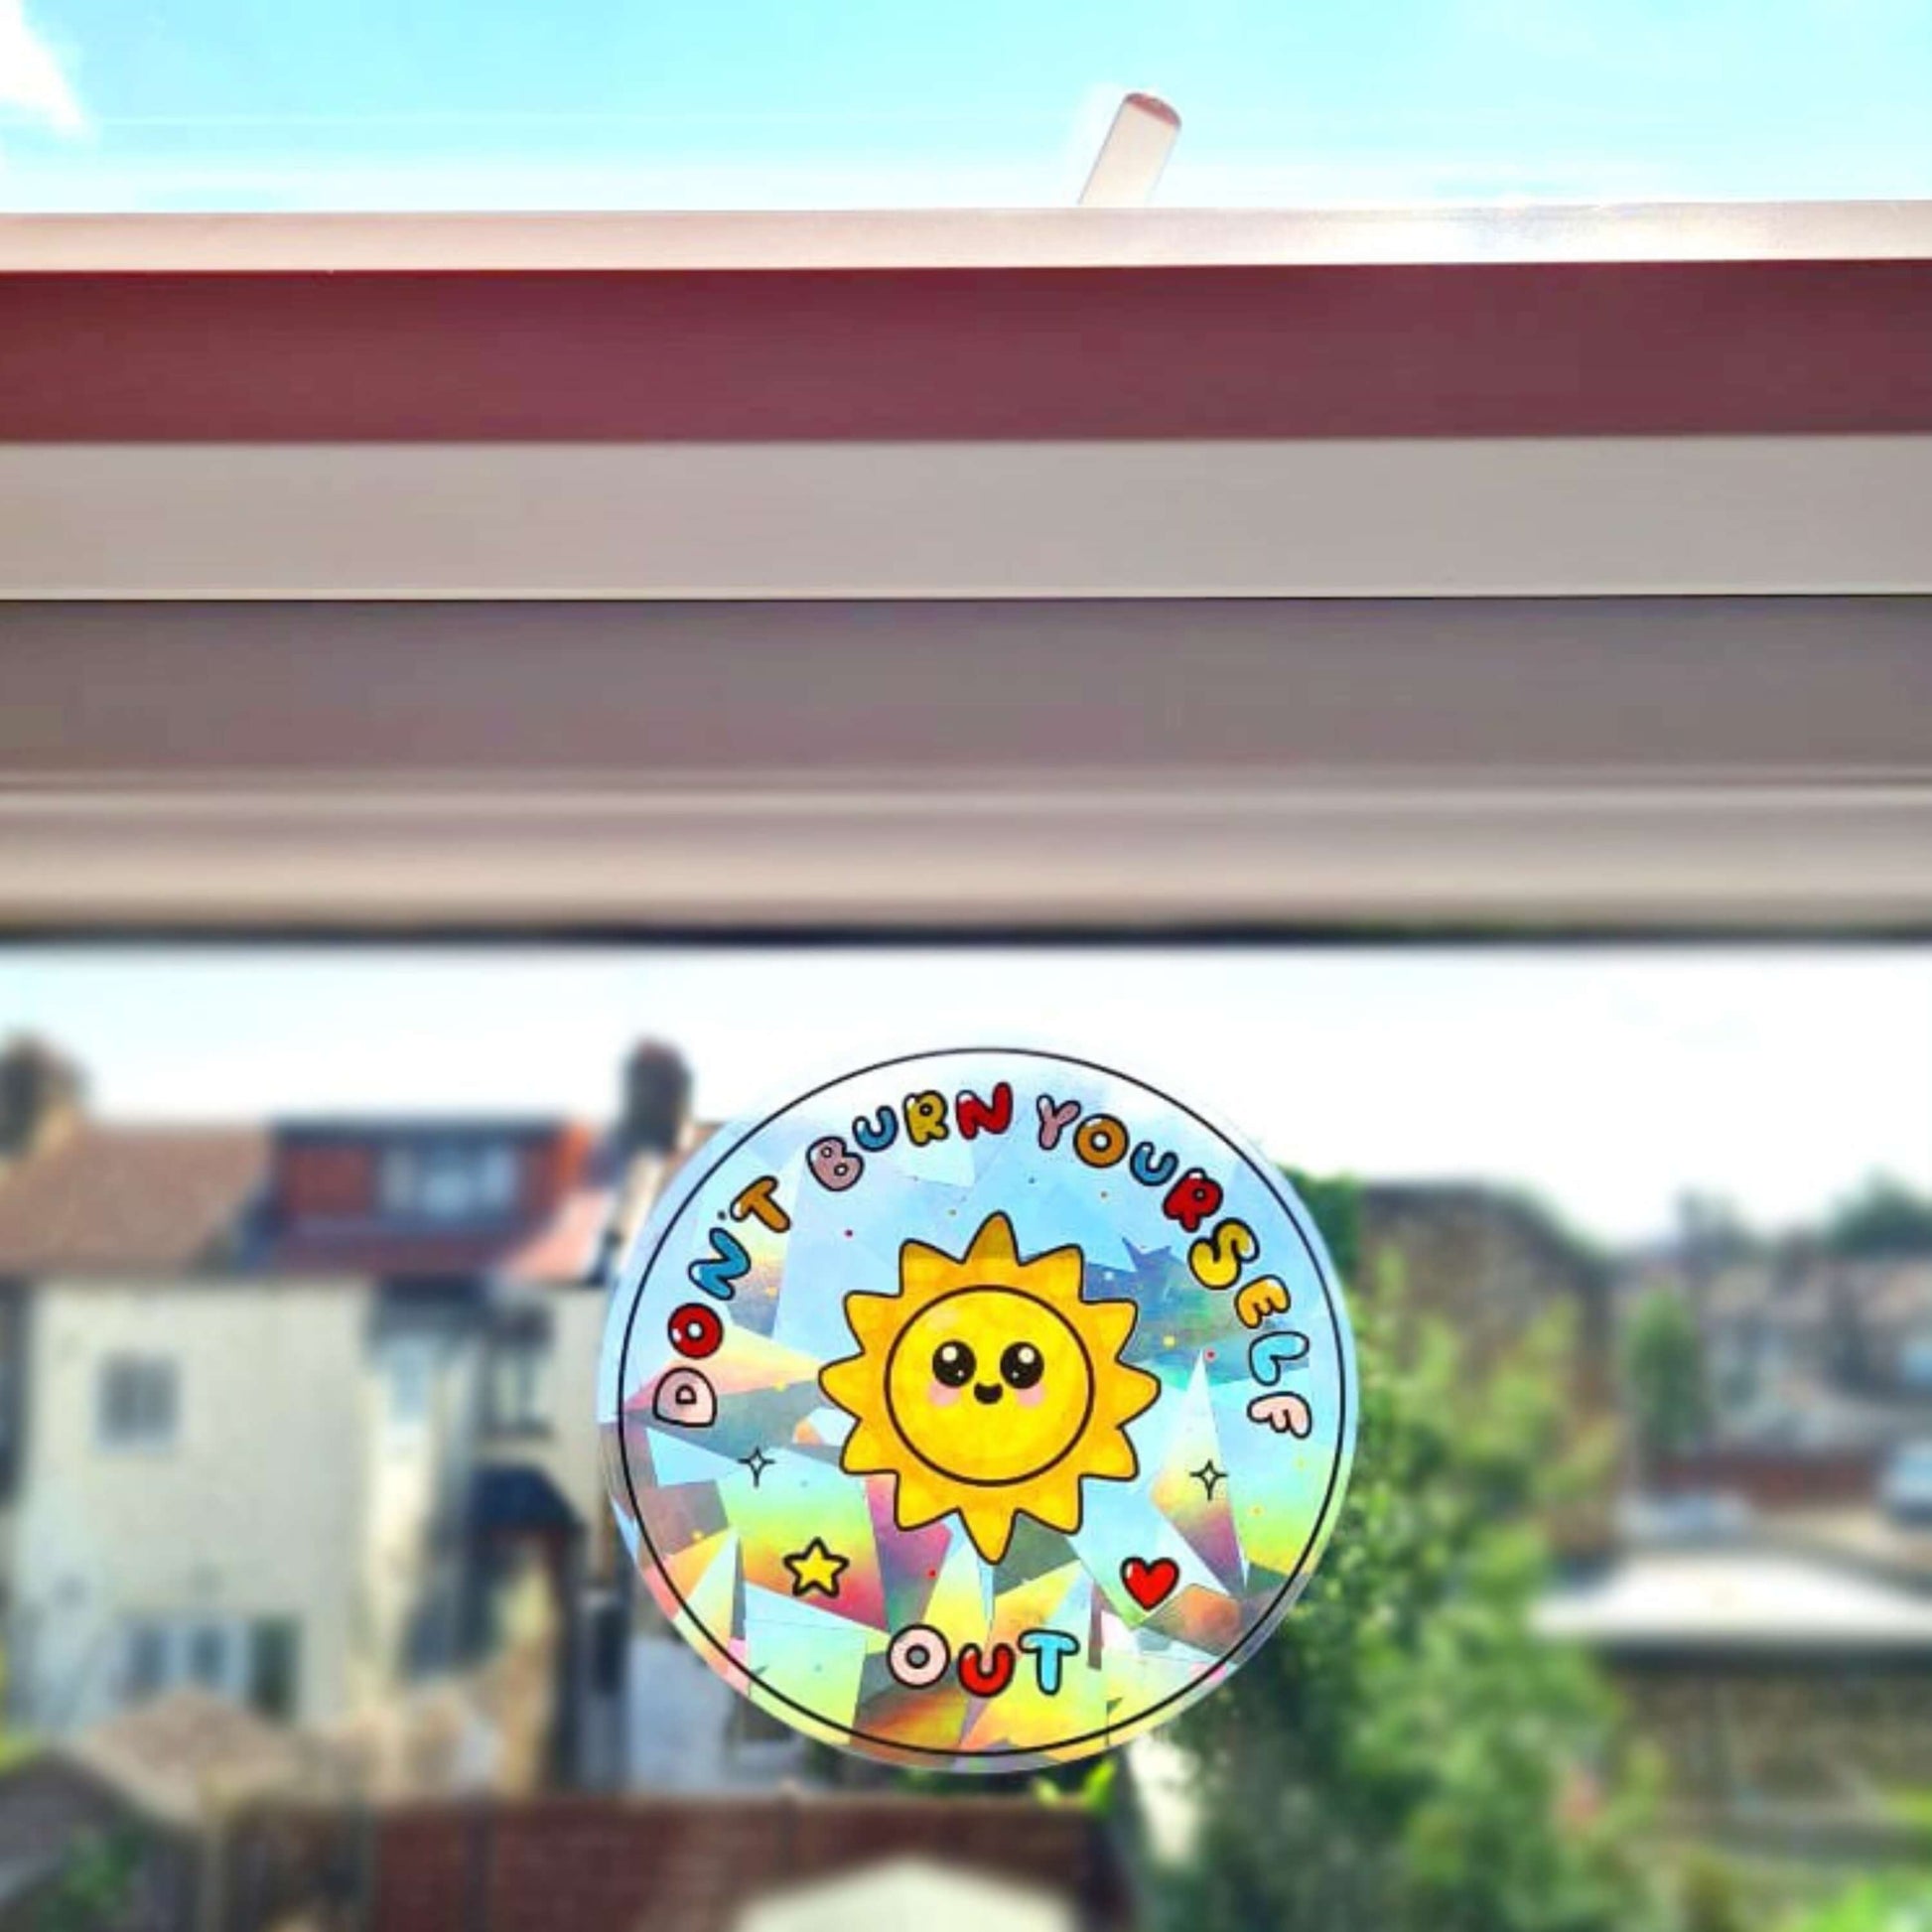 The Don't Burn Yourself Out Sun Catcher Rainbow Window Sticker stuck on a window with blue skies and houses behind. The circle holographic sticker features a smiling sunshine with pink blush in the middle with rainbow bubble writing reading 'don't burn yourself out' with a yellow star, red heart, black sparkle outlines and rainbow dots all over. The design is inspired by self care.